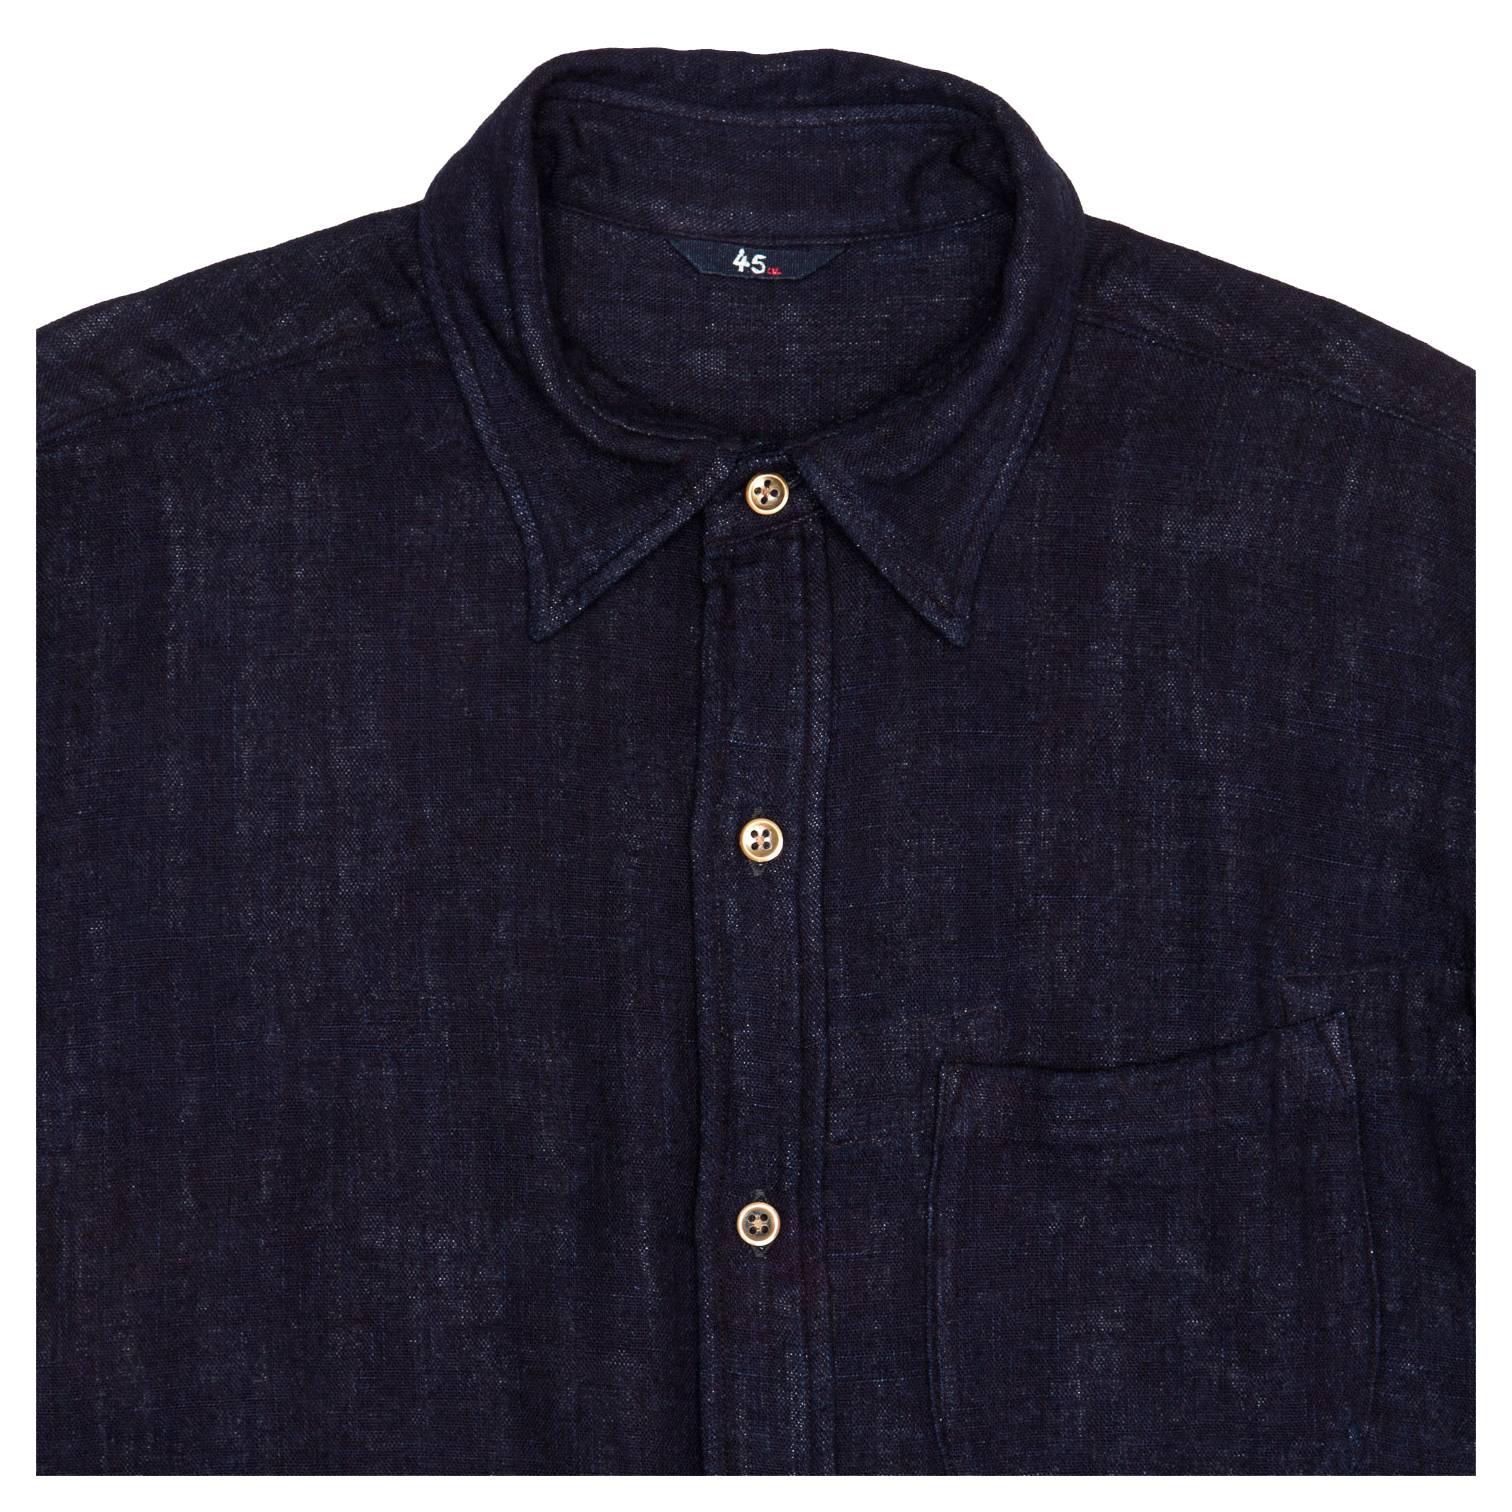 45rpm Dark Blue Cotton Shirt For Man In New Condition For Sale In Brooklyn, NY